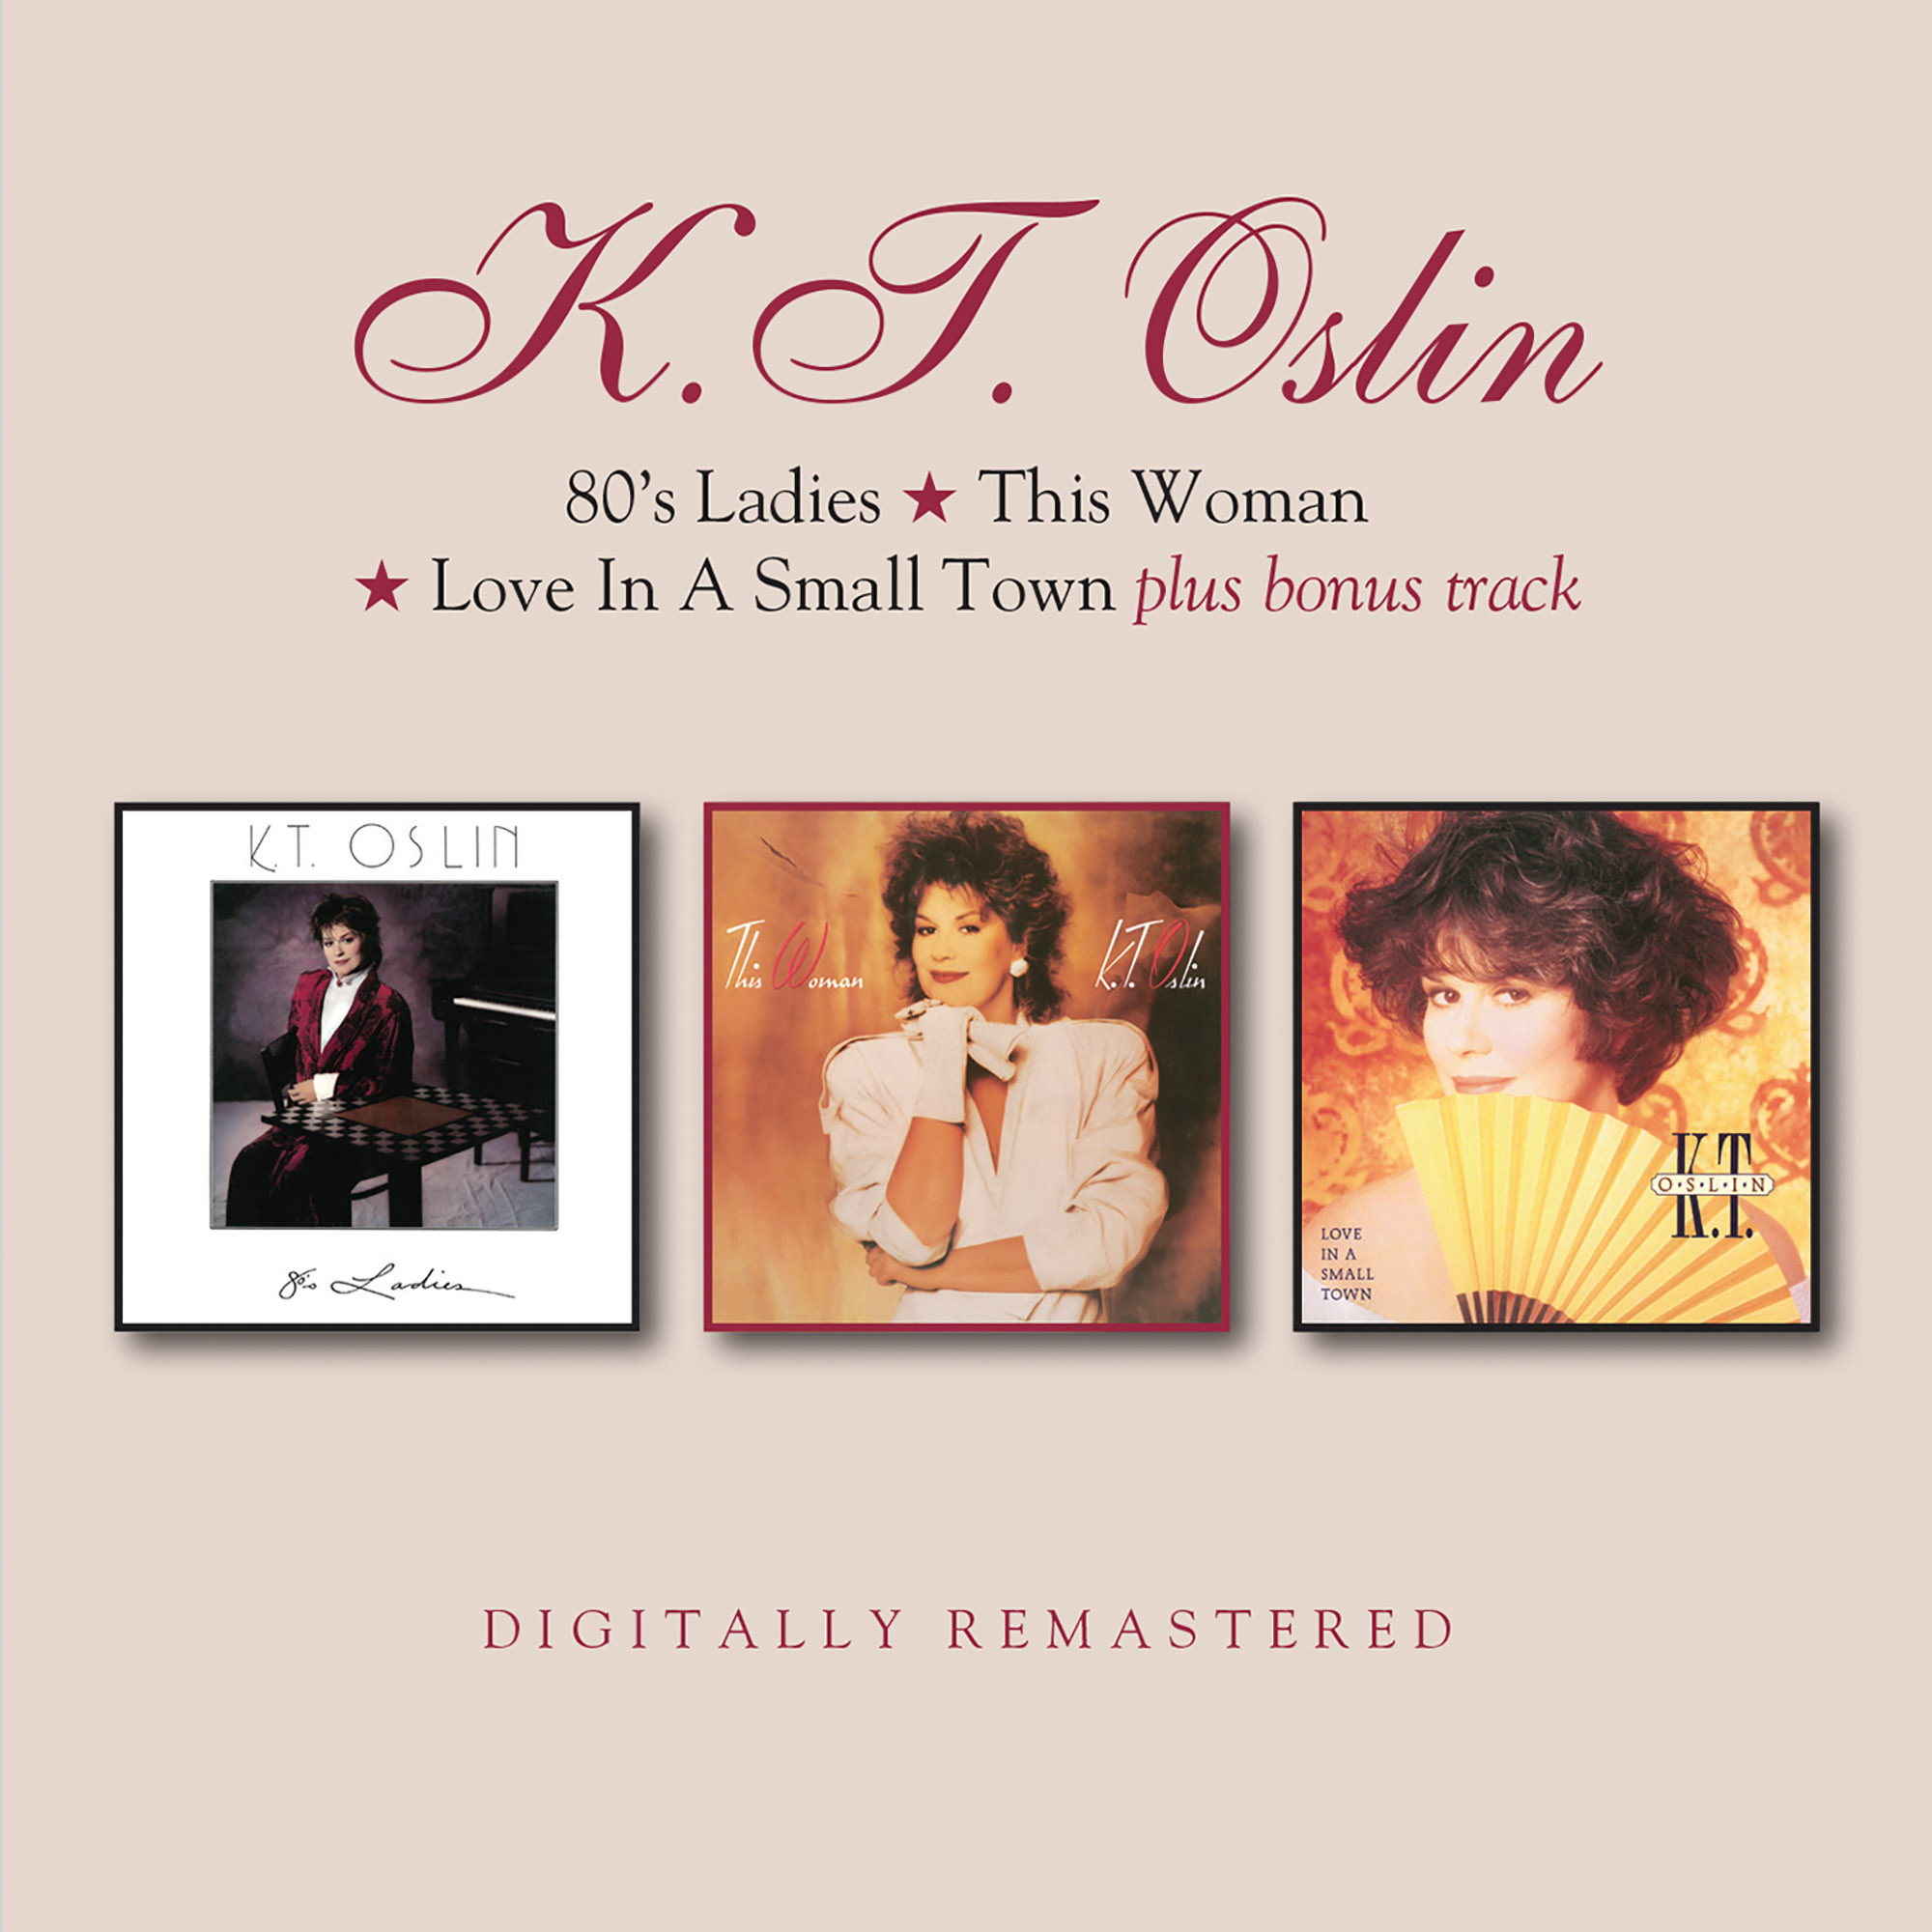 K.T. OSLIN / 80'S LADIES / THIS WOMAN / LOVE IN A SMALL TOWN + BONUS TRACK